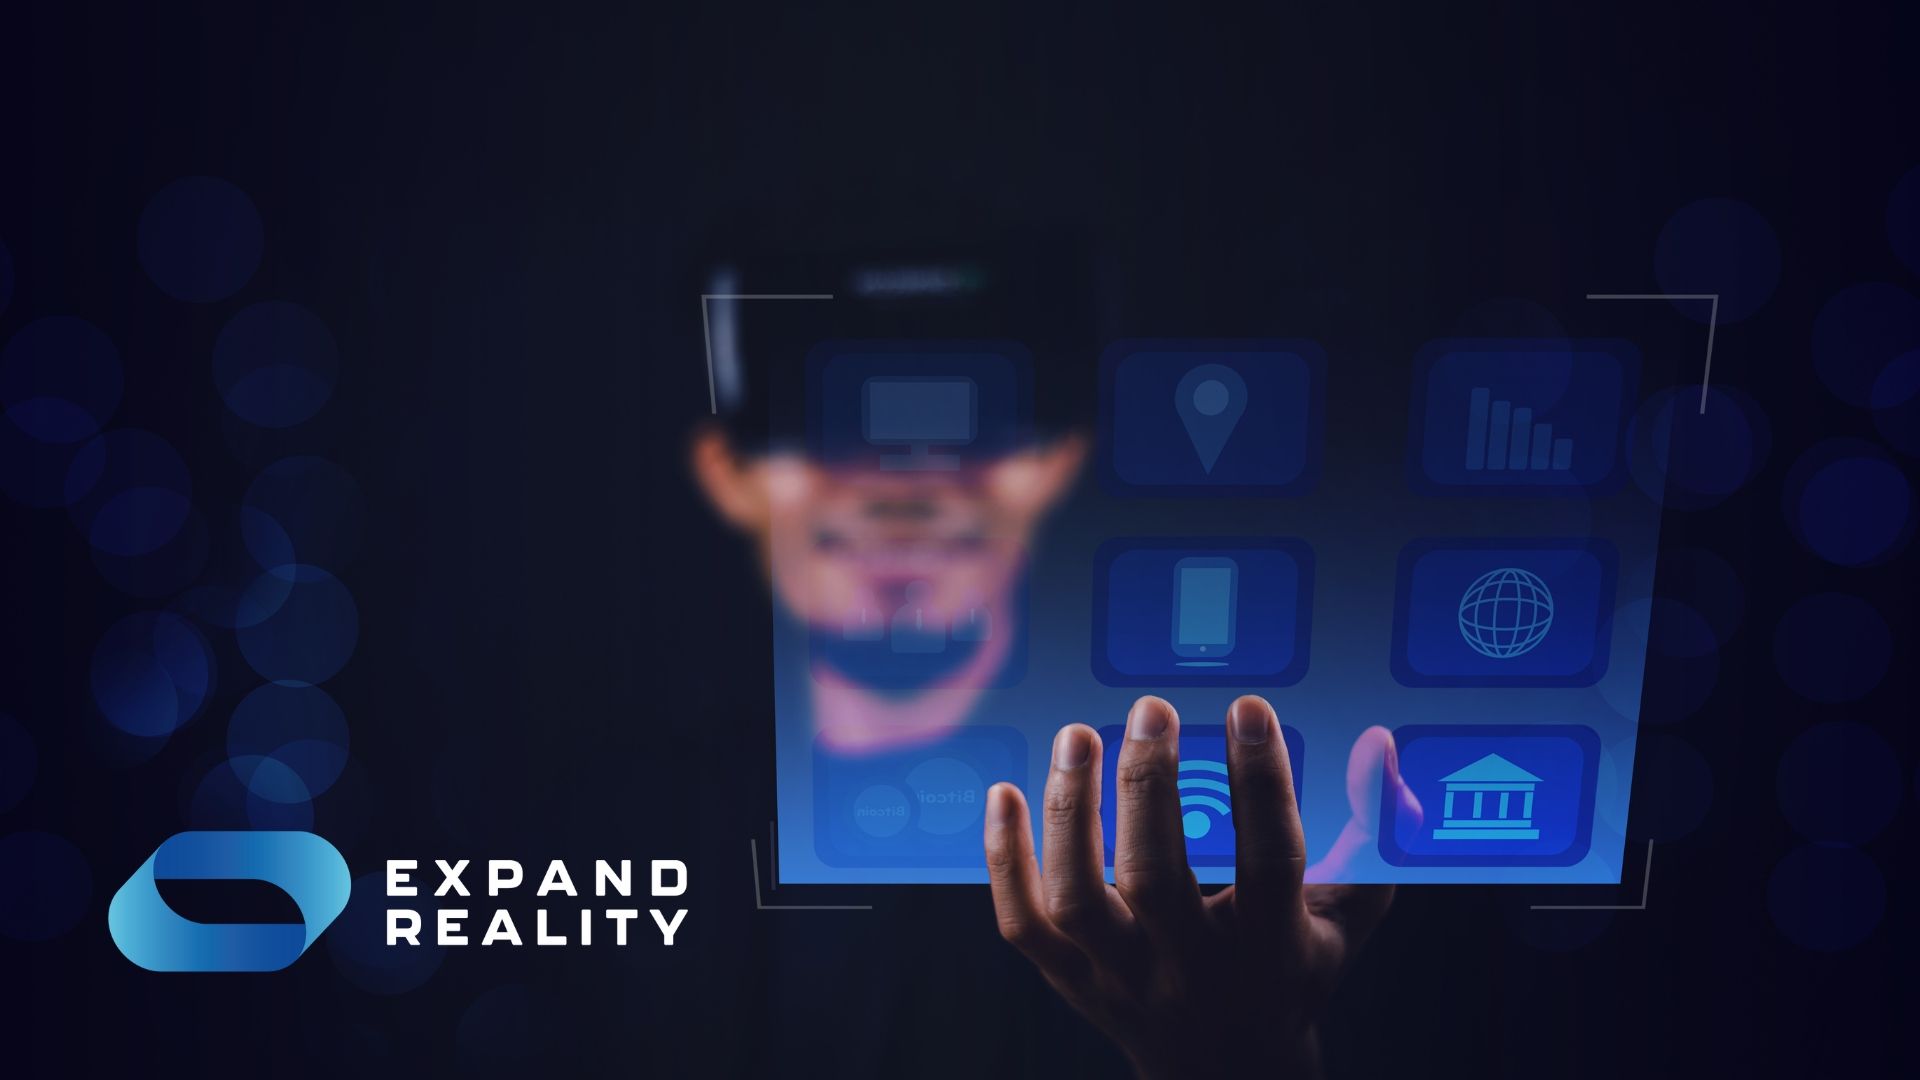 Vuzix leaders in Assisted reality